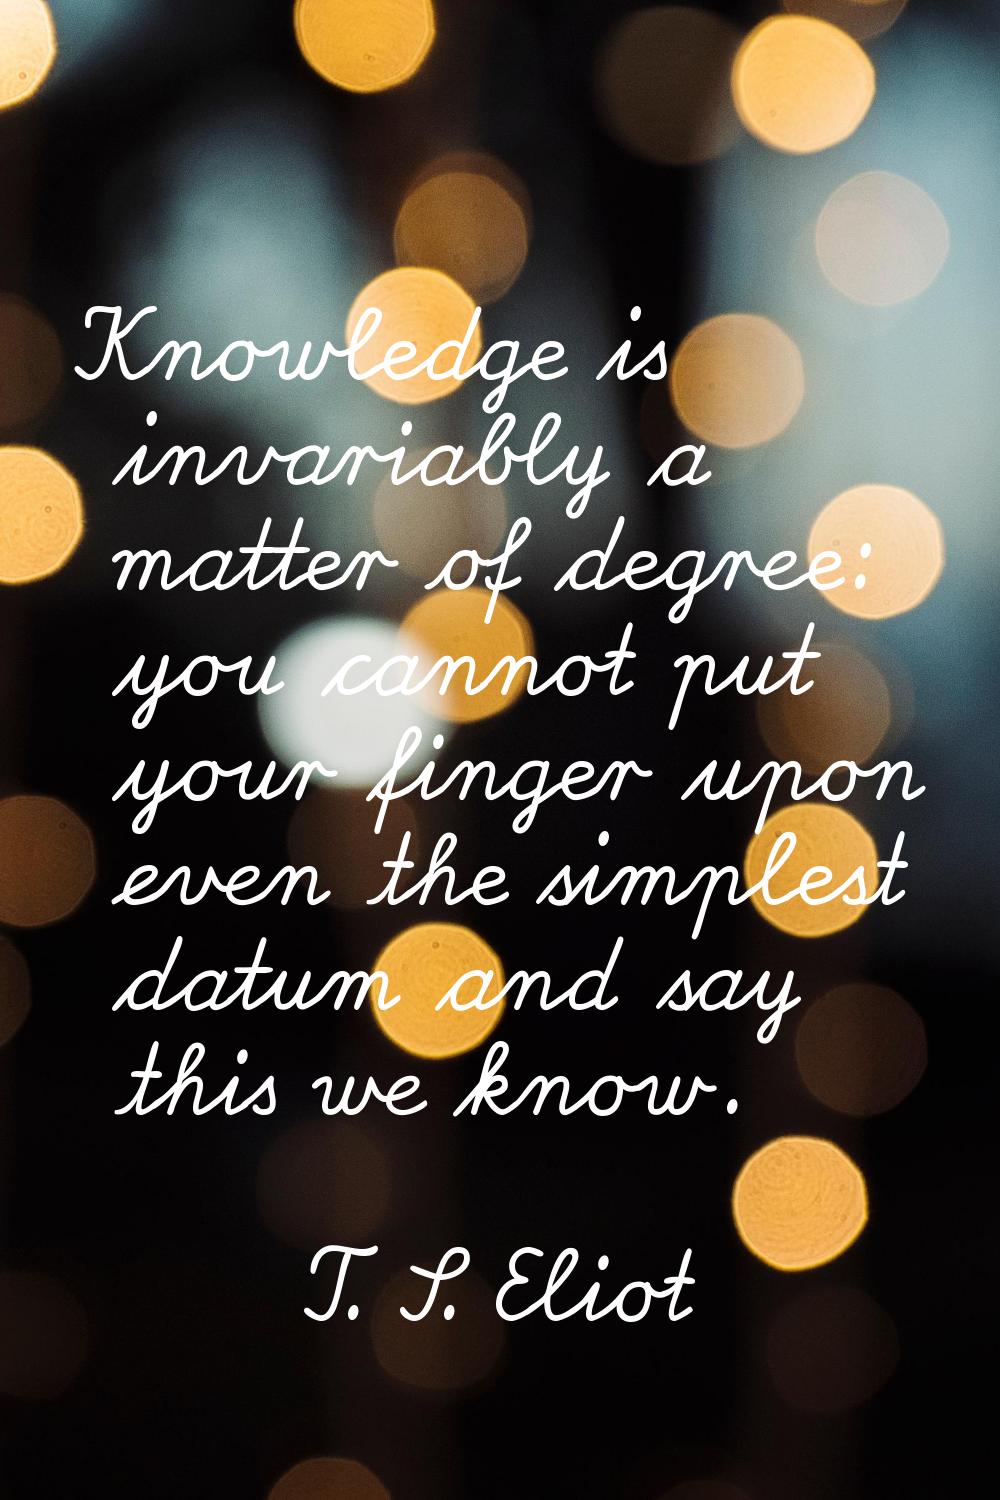 Knowledge is invariably a matter of degree: you cannot put your finger upon even the simplest datum